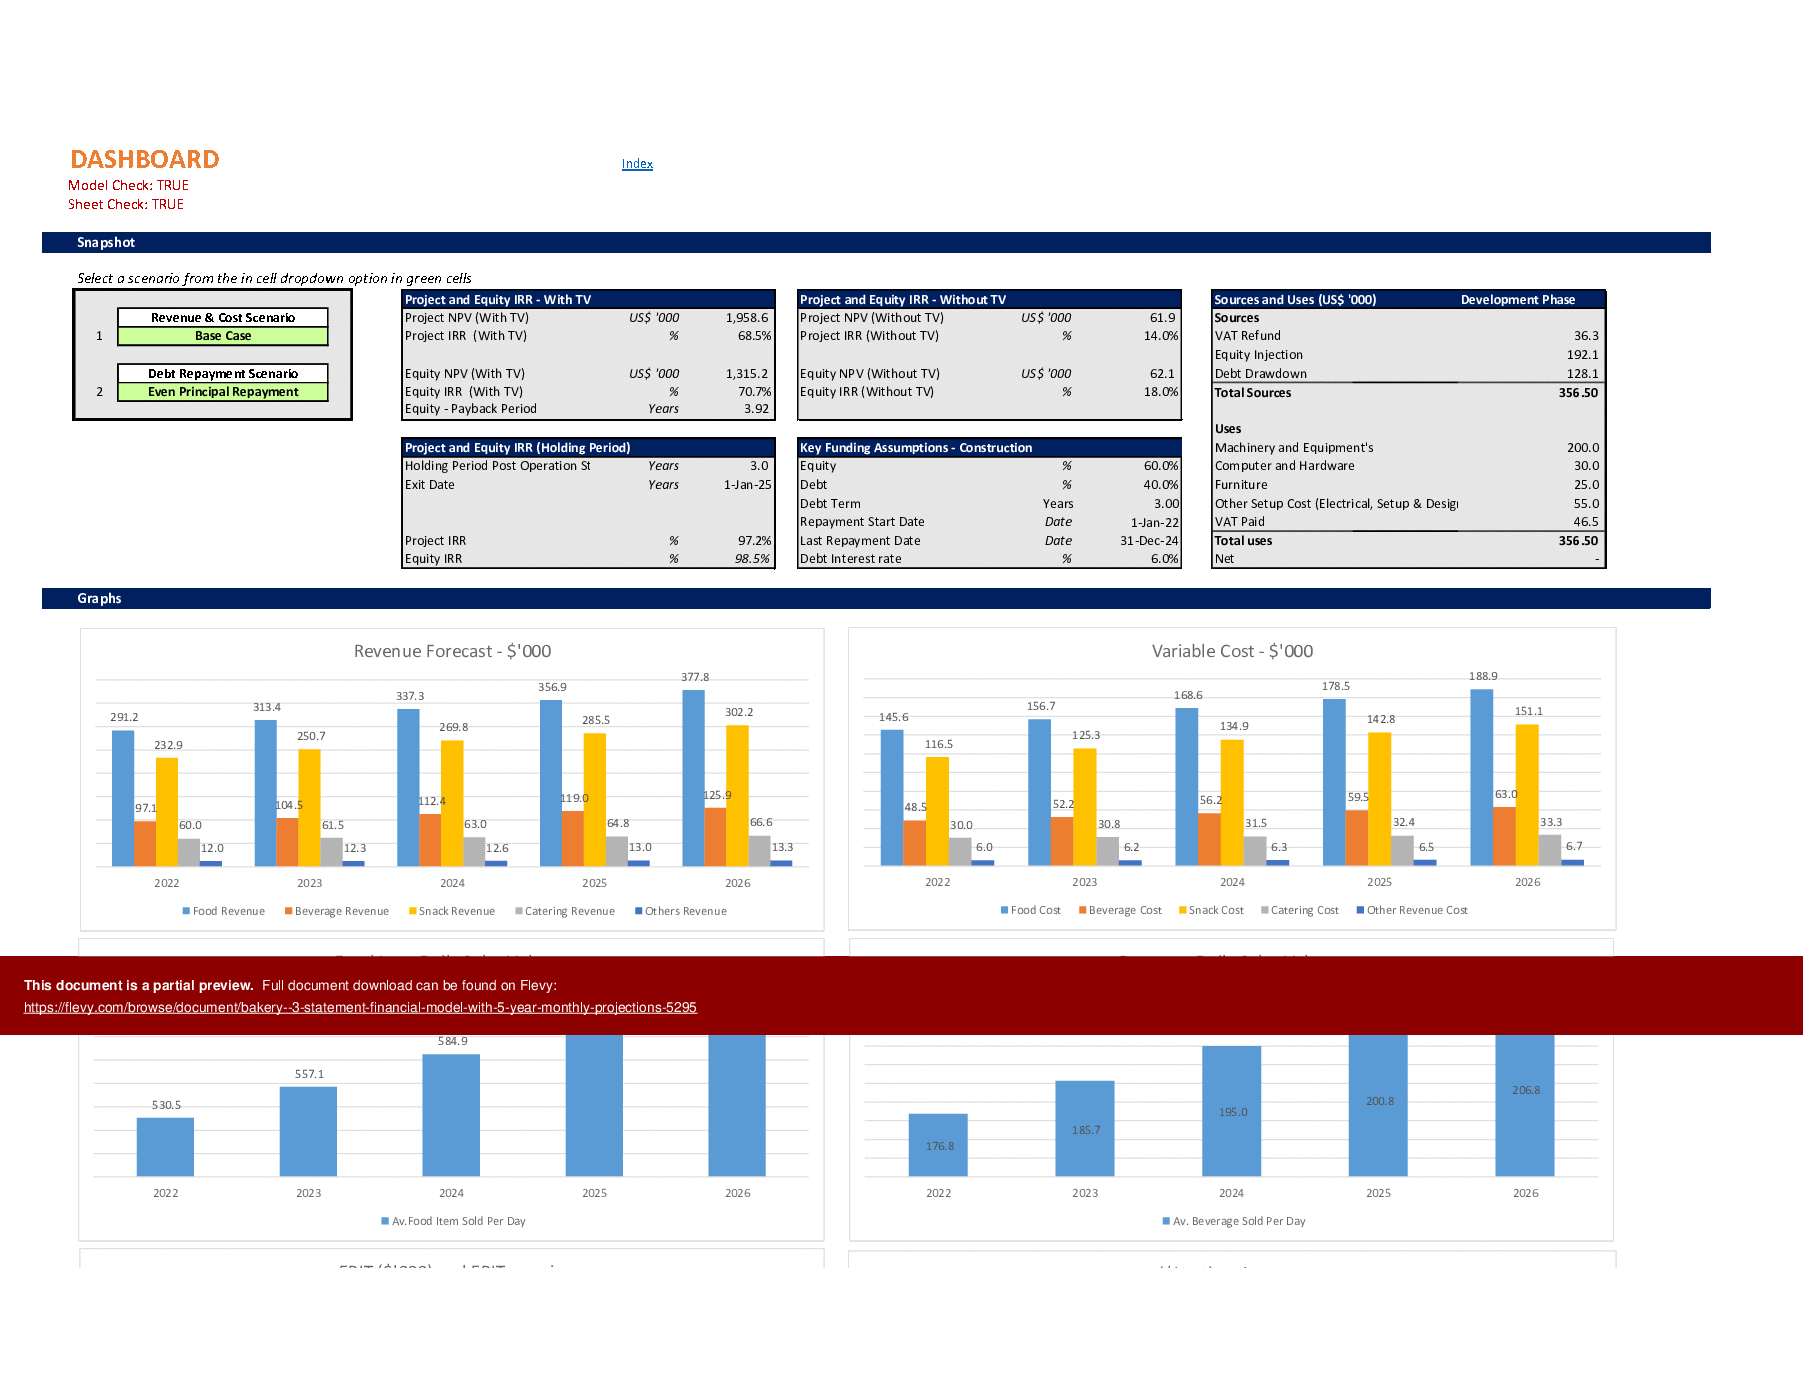 This is a partial preview of Bakery - 3 Statement Financial Model with 5-Year Monthly Projections (Excel workbook (XLSM)). 